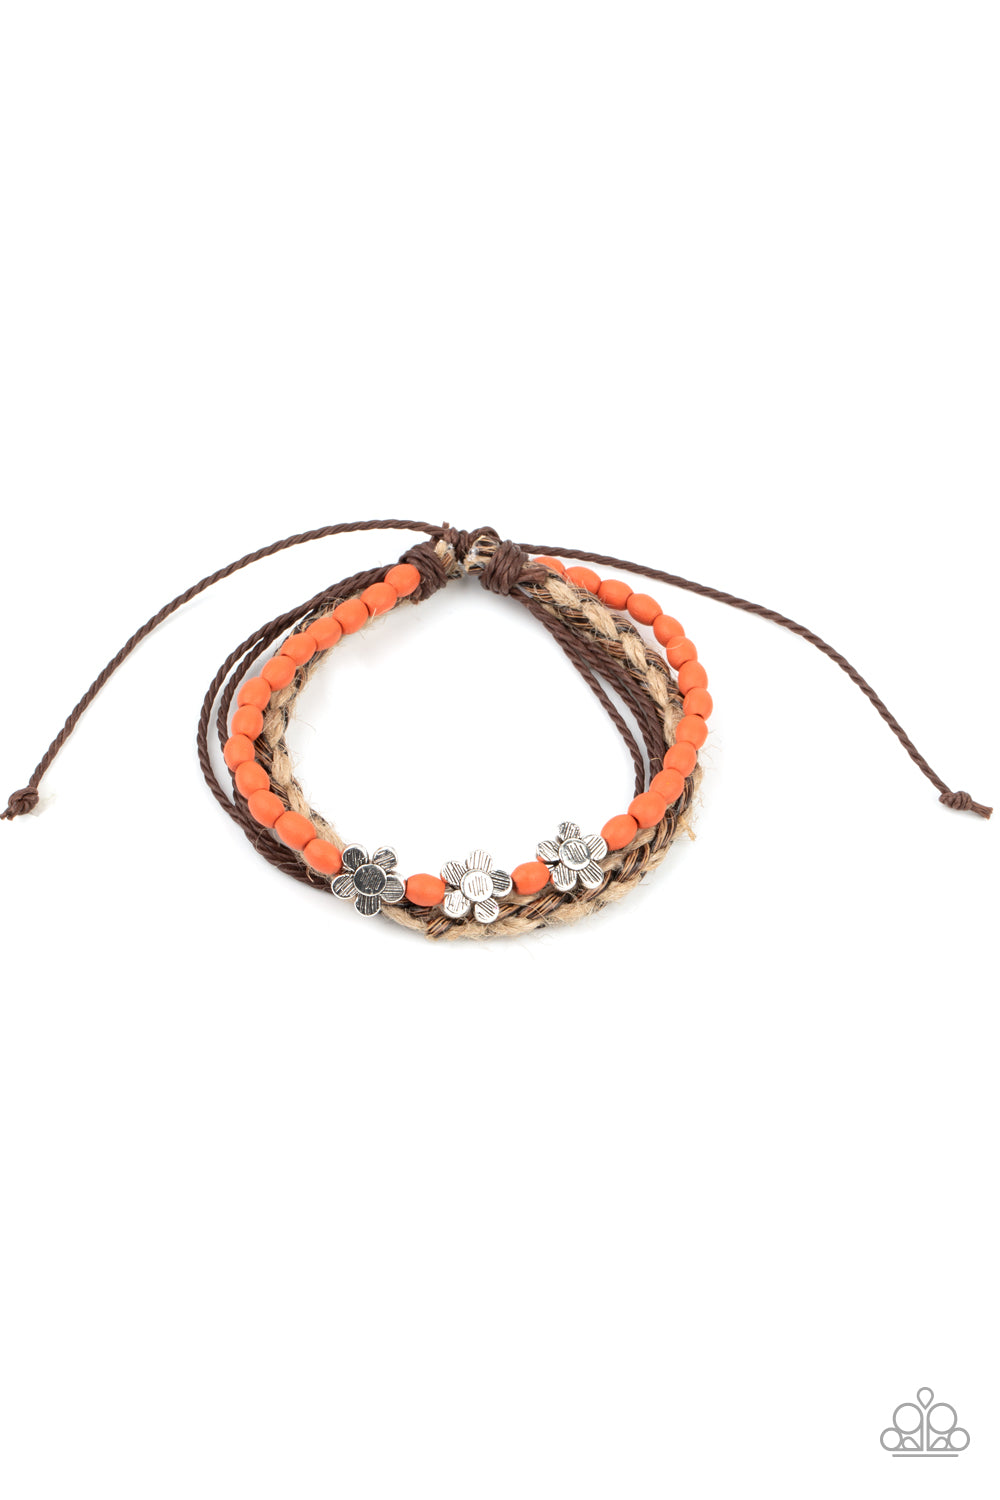 Raffia Remix Orange Urban Bracelet - Paparazzi Accessories  Three delightful etched silver flowers stand out on a strand of orange wooden beads. Paired with an assortment of braided twine and cording, the set wraps around the wrist for an earthy remix. Features an adjustable sliding knot closure.  All Paparazzi Accessories are lead free and nickel free!  Sold as one individual bracelet.